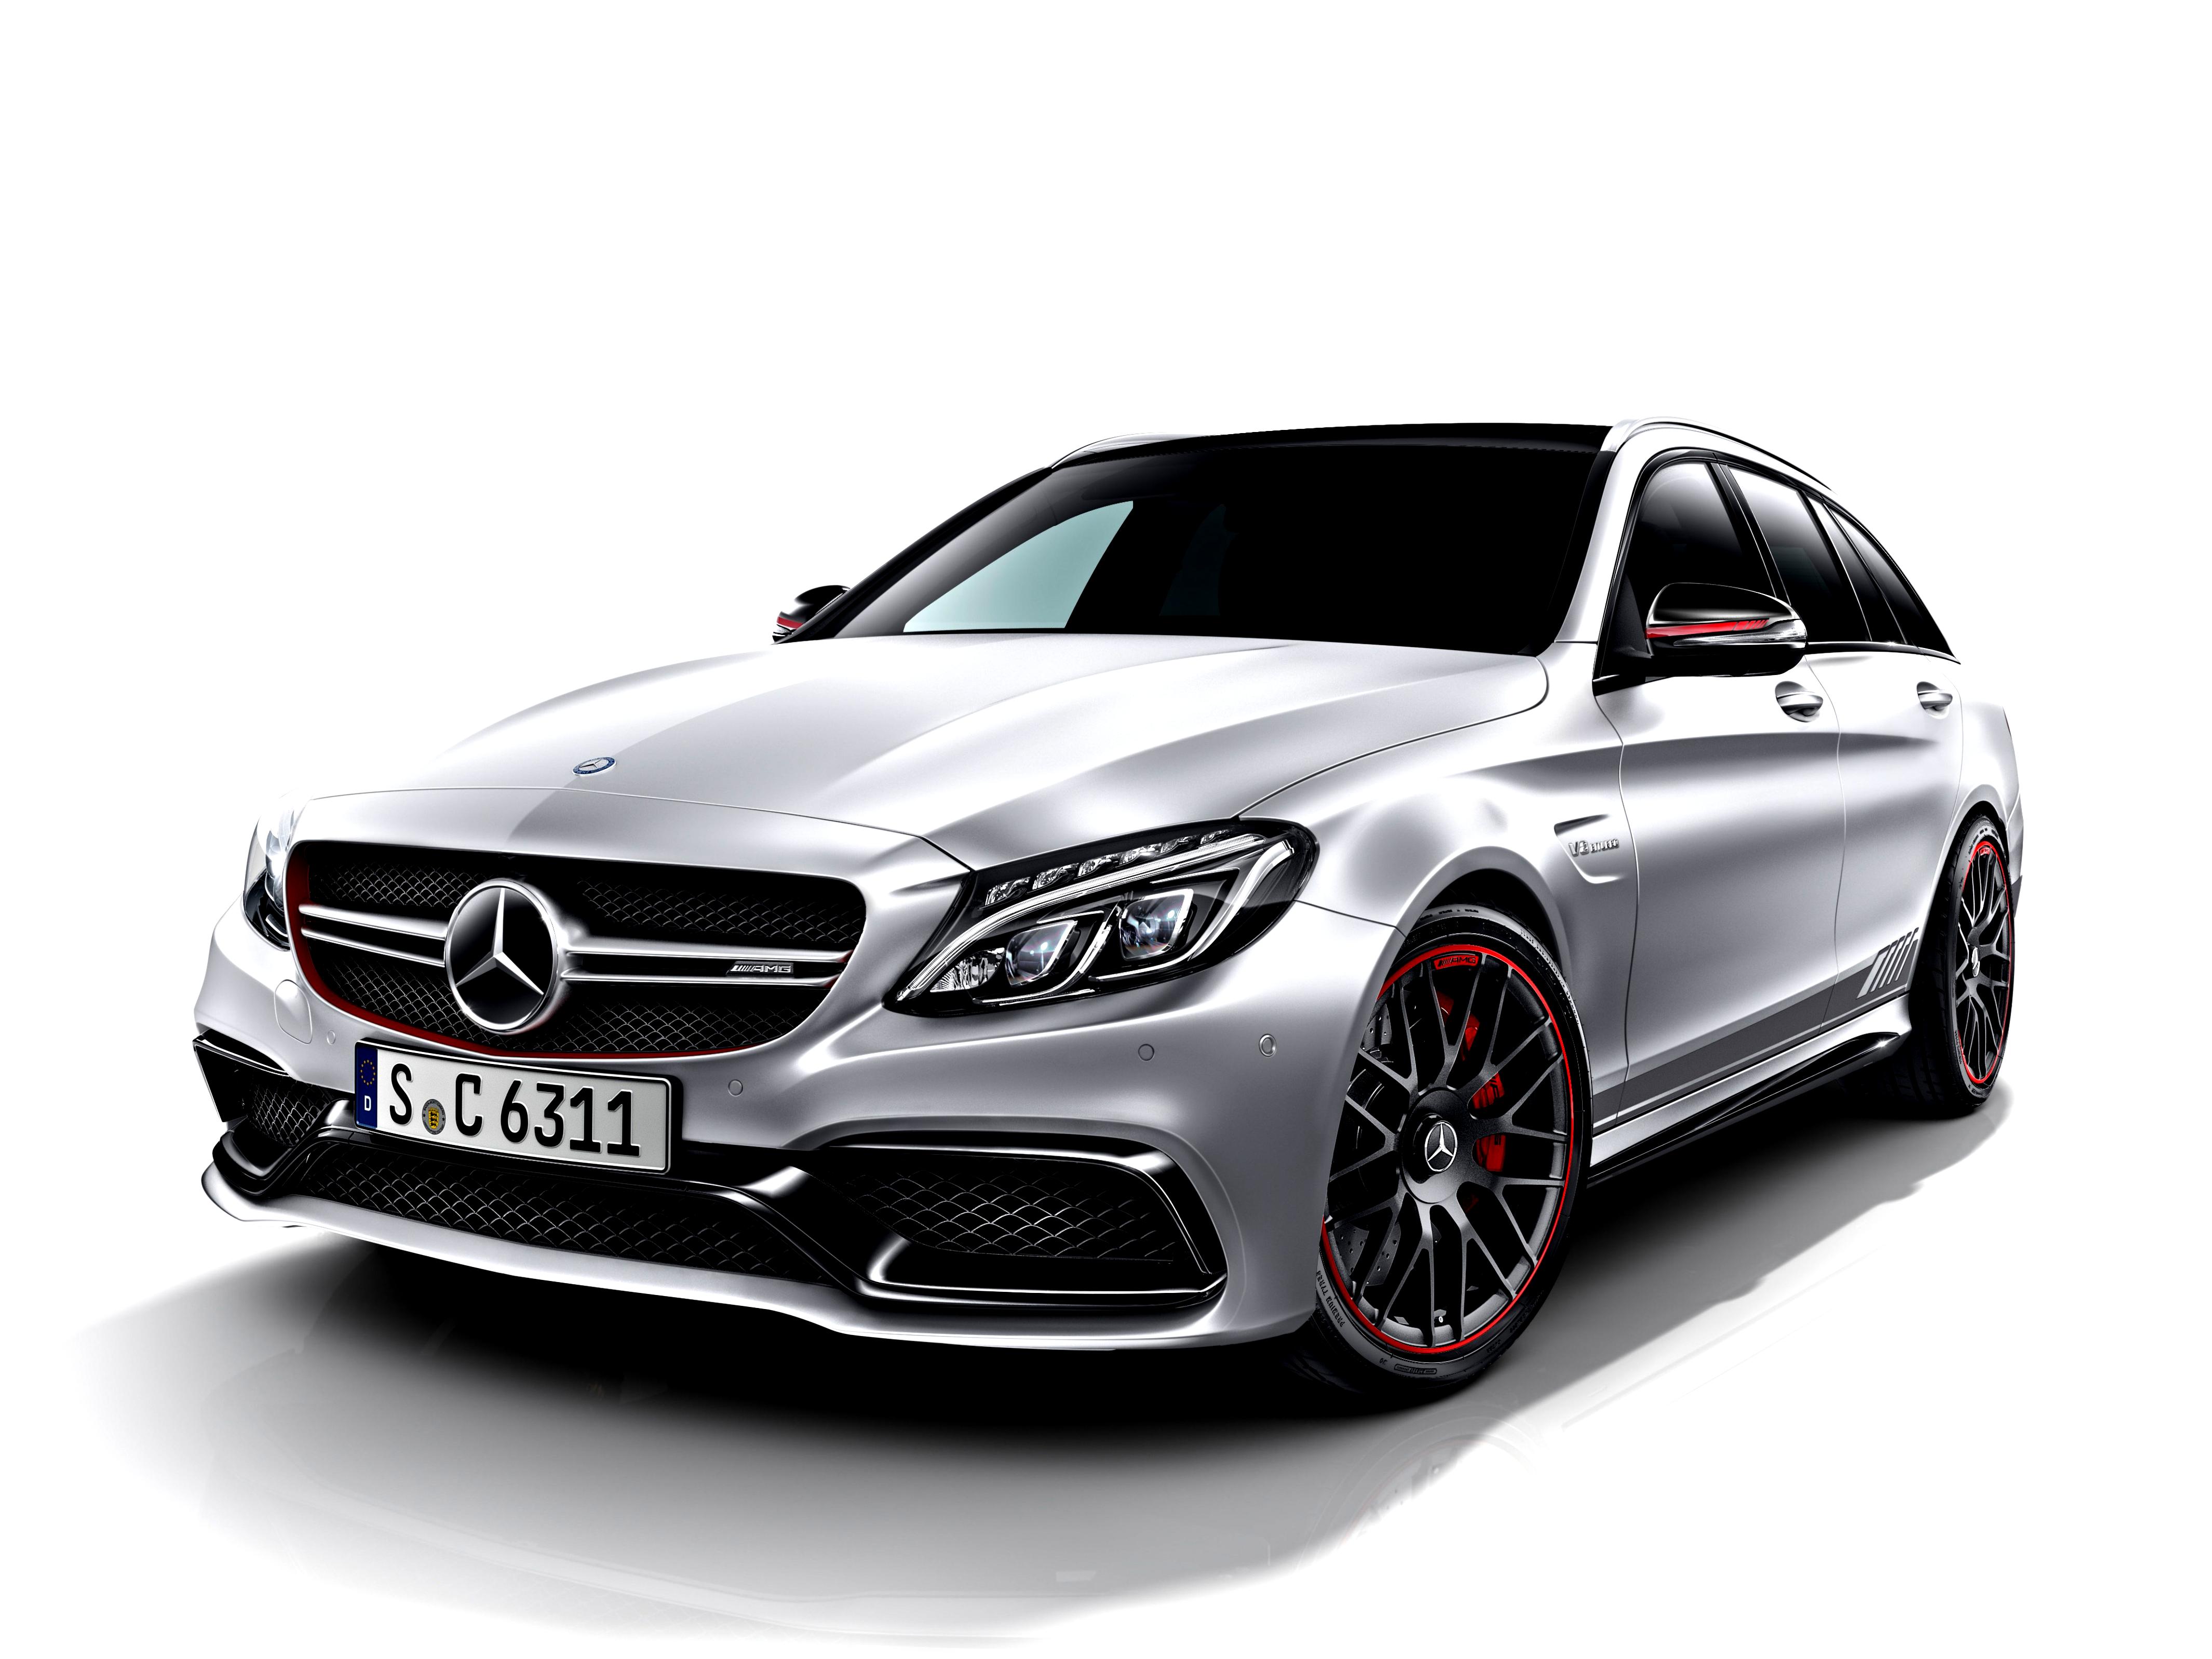 Mercedes Benz C 63 AMG T-Modell S205 2014 #42